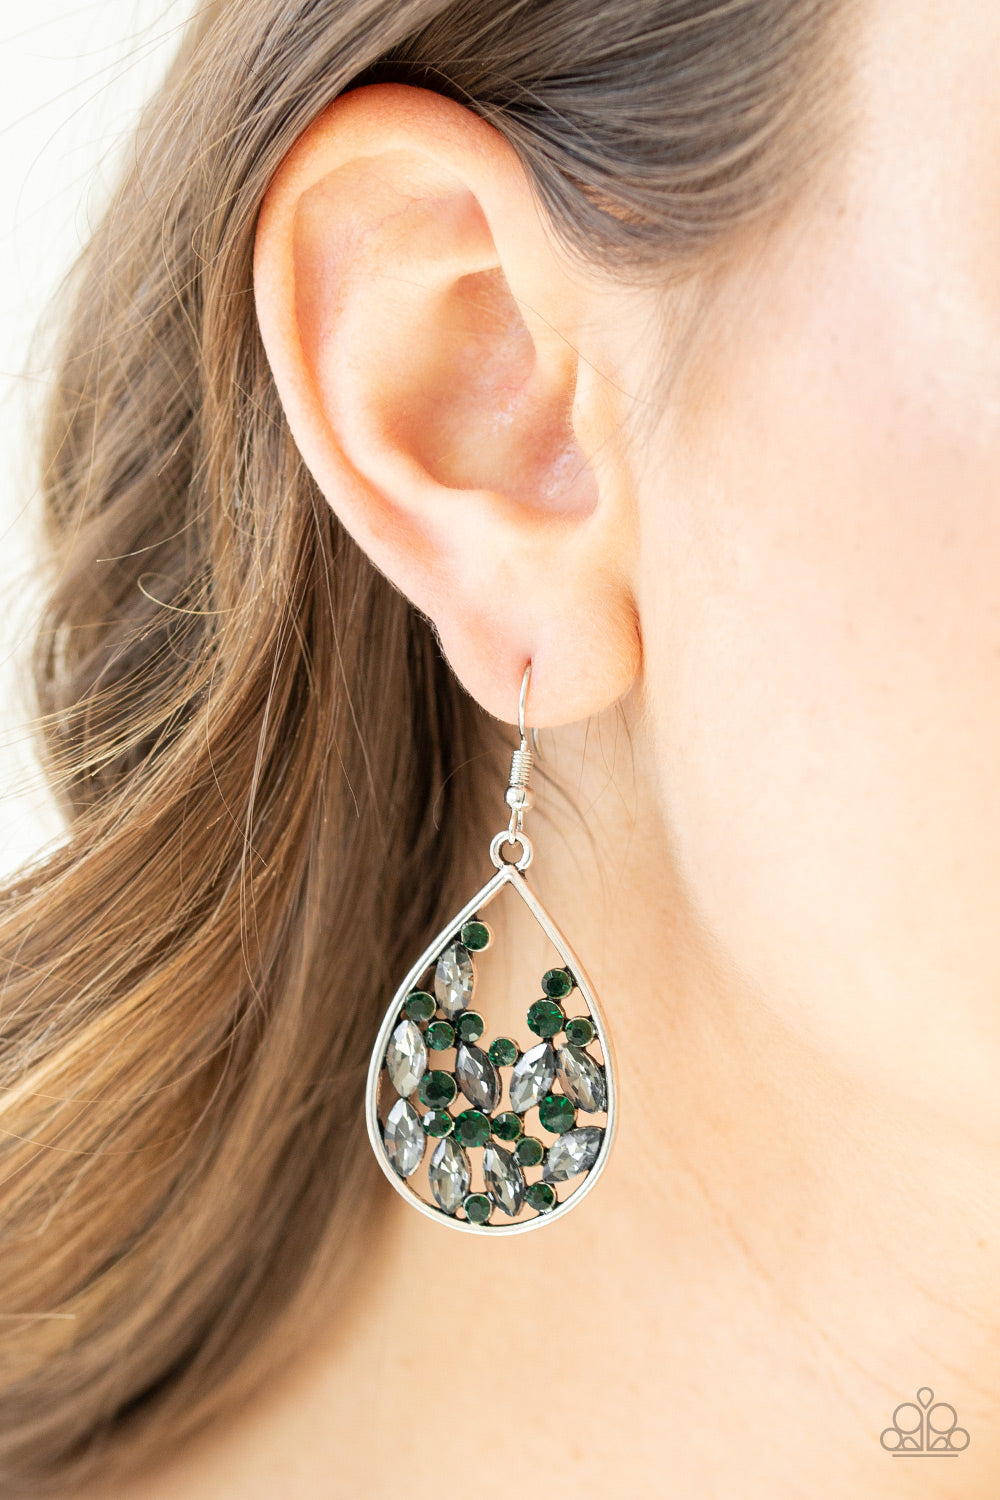 Paparazzi Earrings - Cash or Crystal? - Green